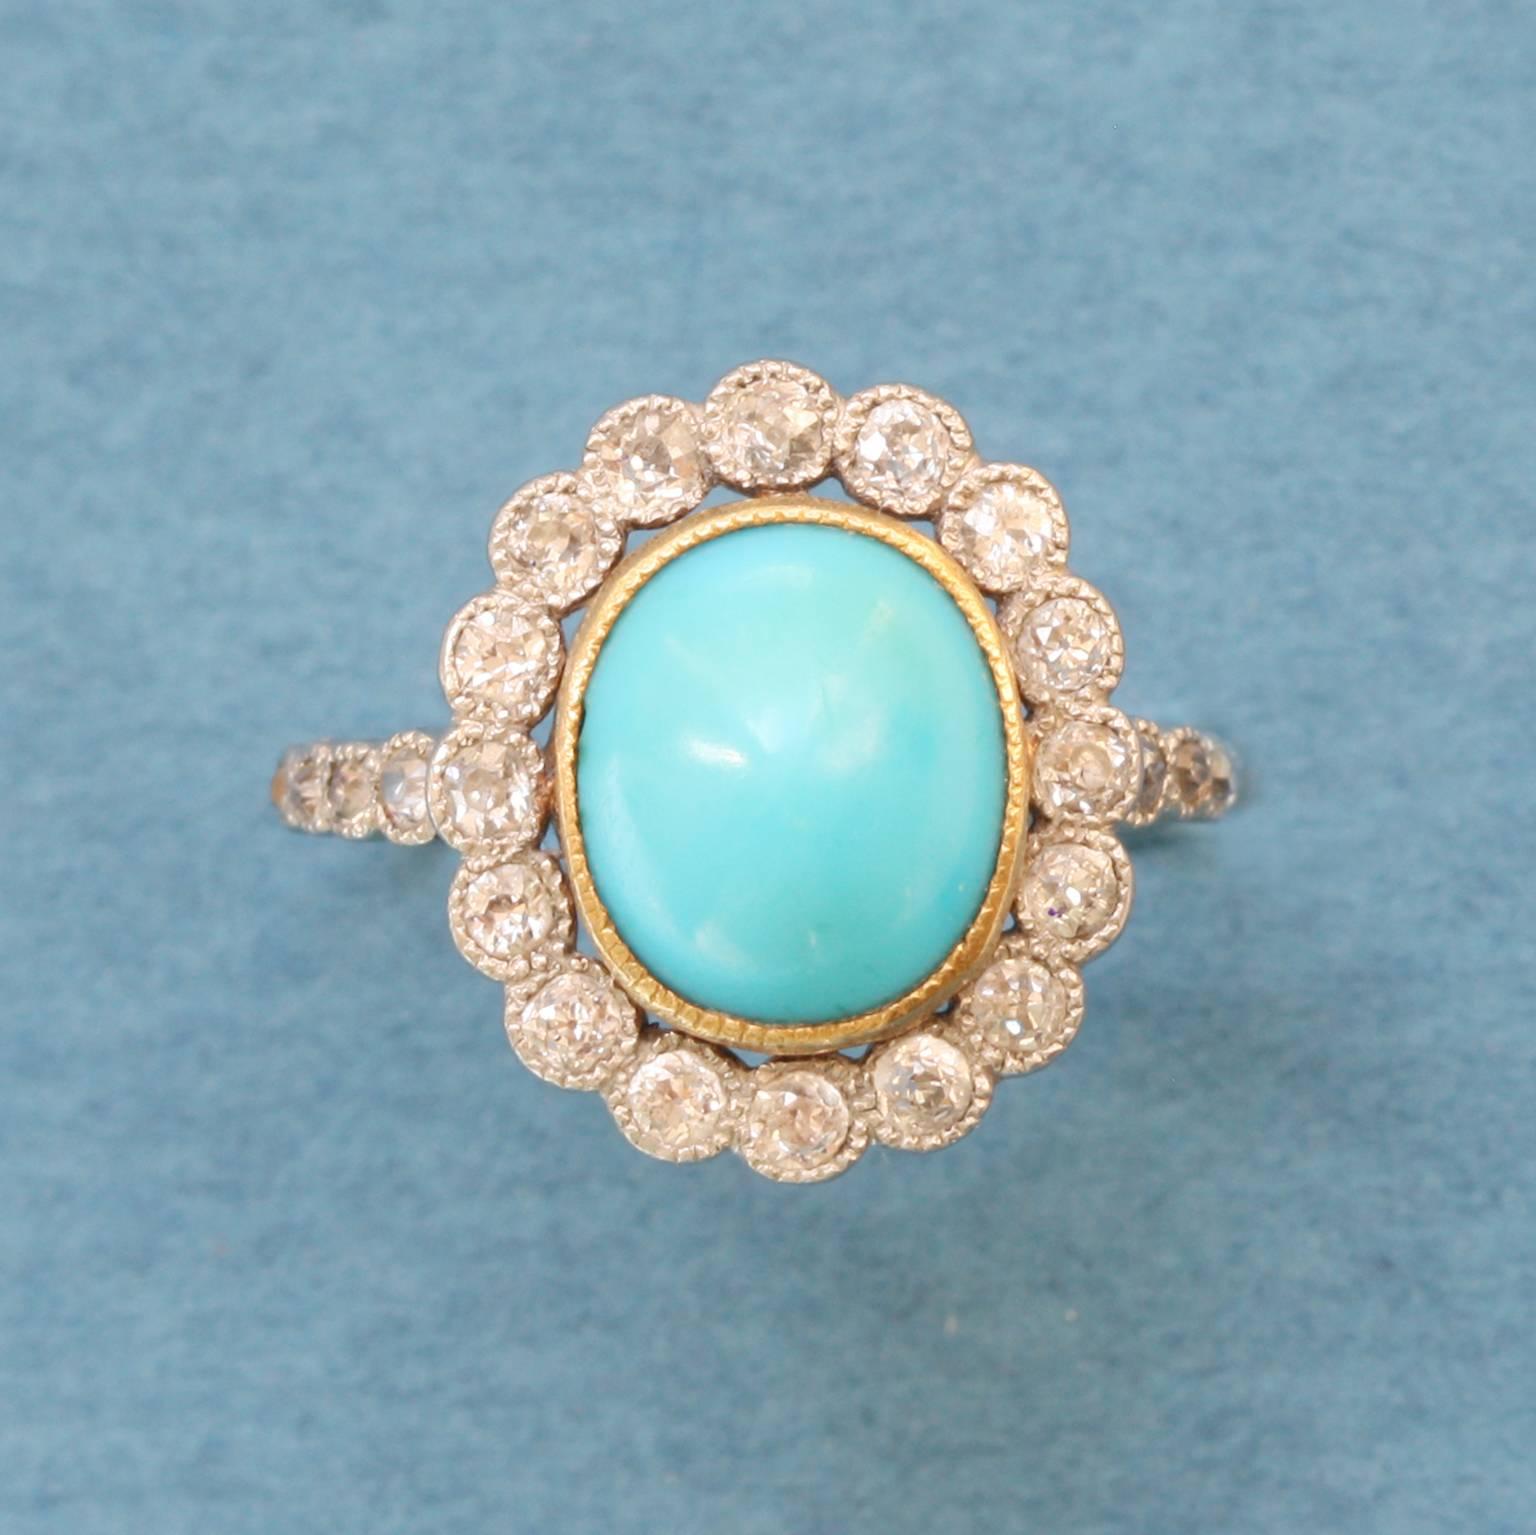 A platinum and gold edwardian cluster ring with small old cut diamonds around a cabochon cut turquoise, circa 1910.

ring size: 15.5 mm 4 3/4 US.
weight: 4.1 grams